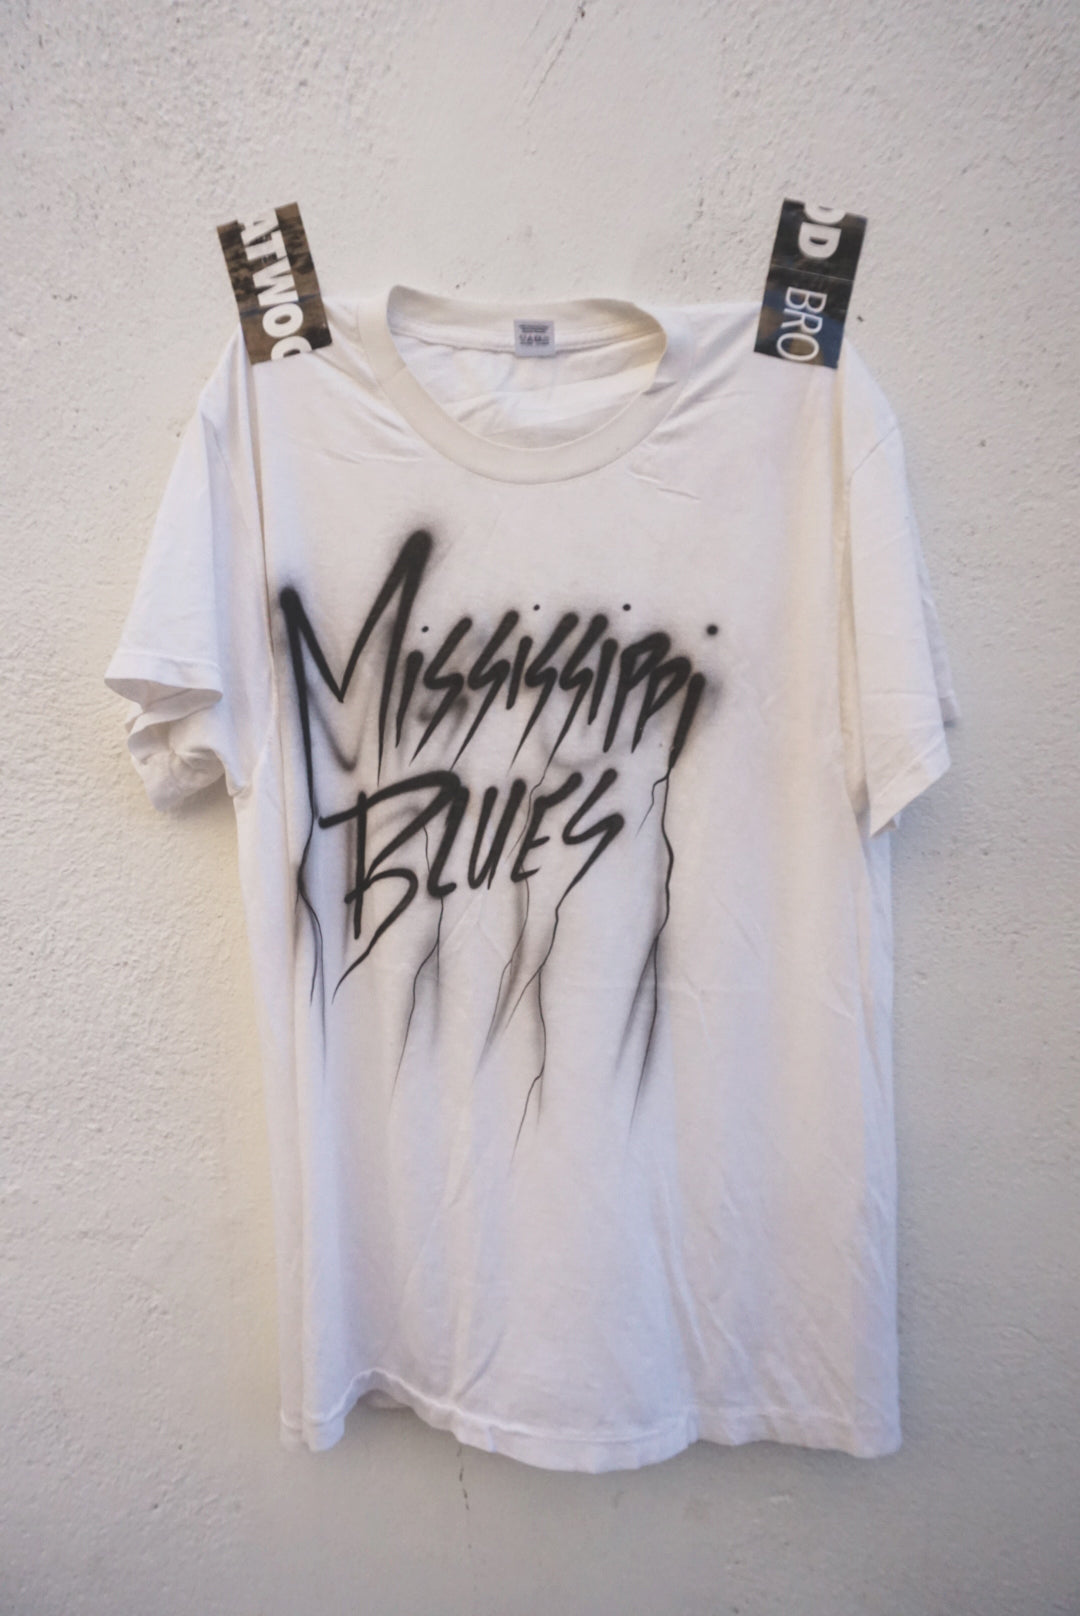 The airbrush MS BLUES tee